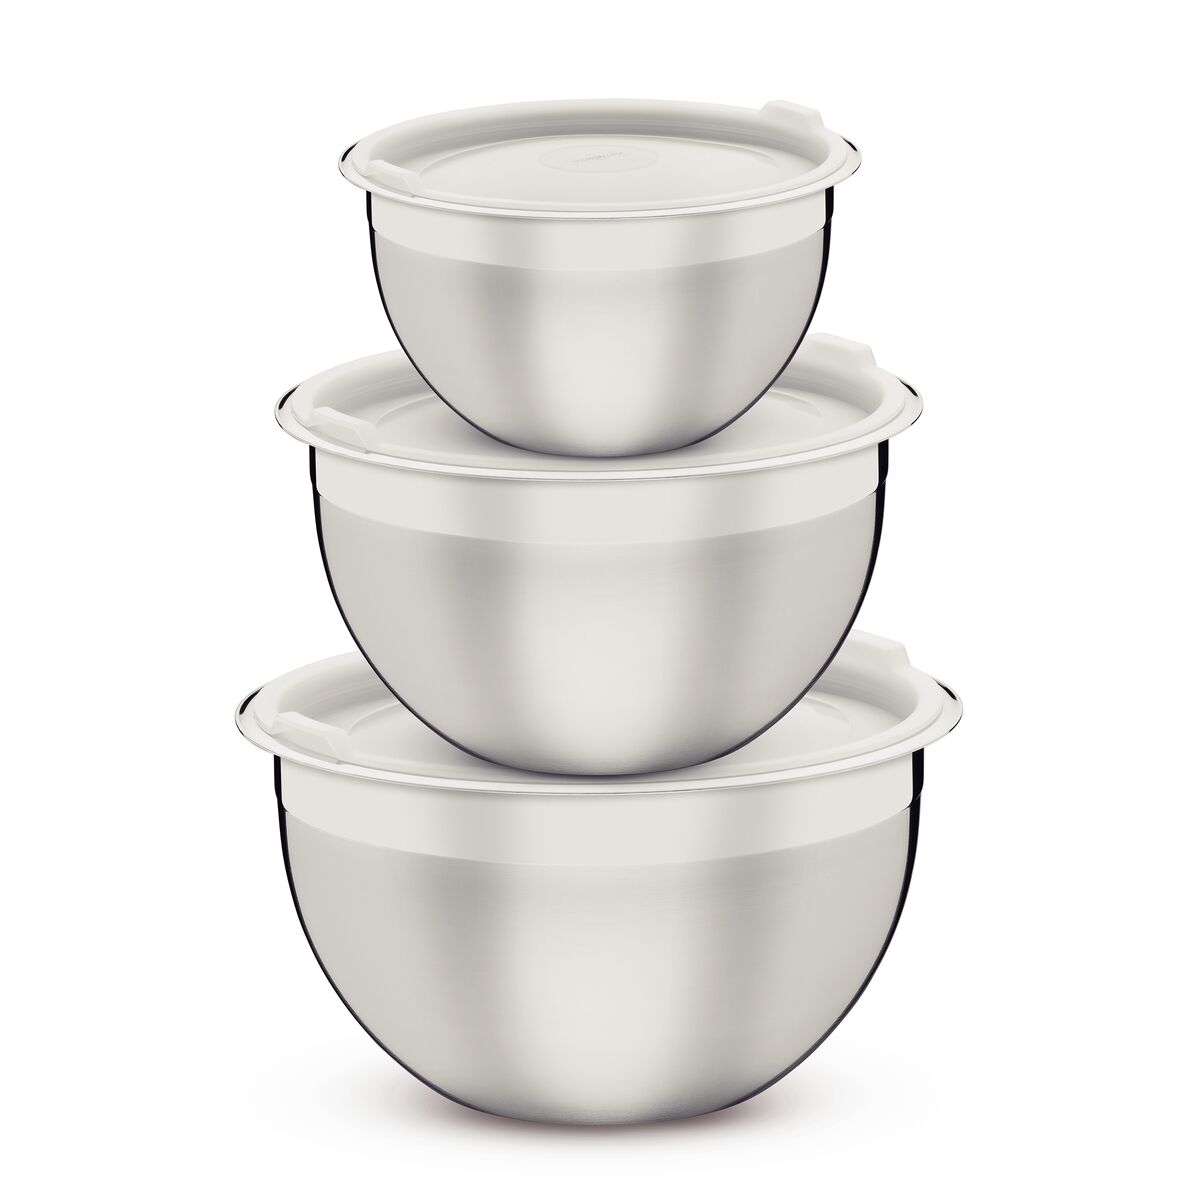 Tramontina Cucina stainless steel container set with plastic lids, 3 pieces